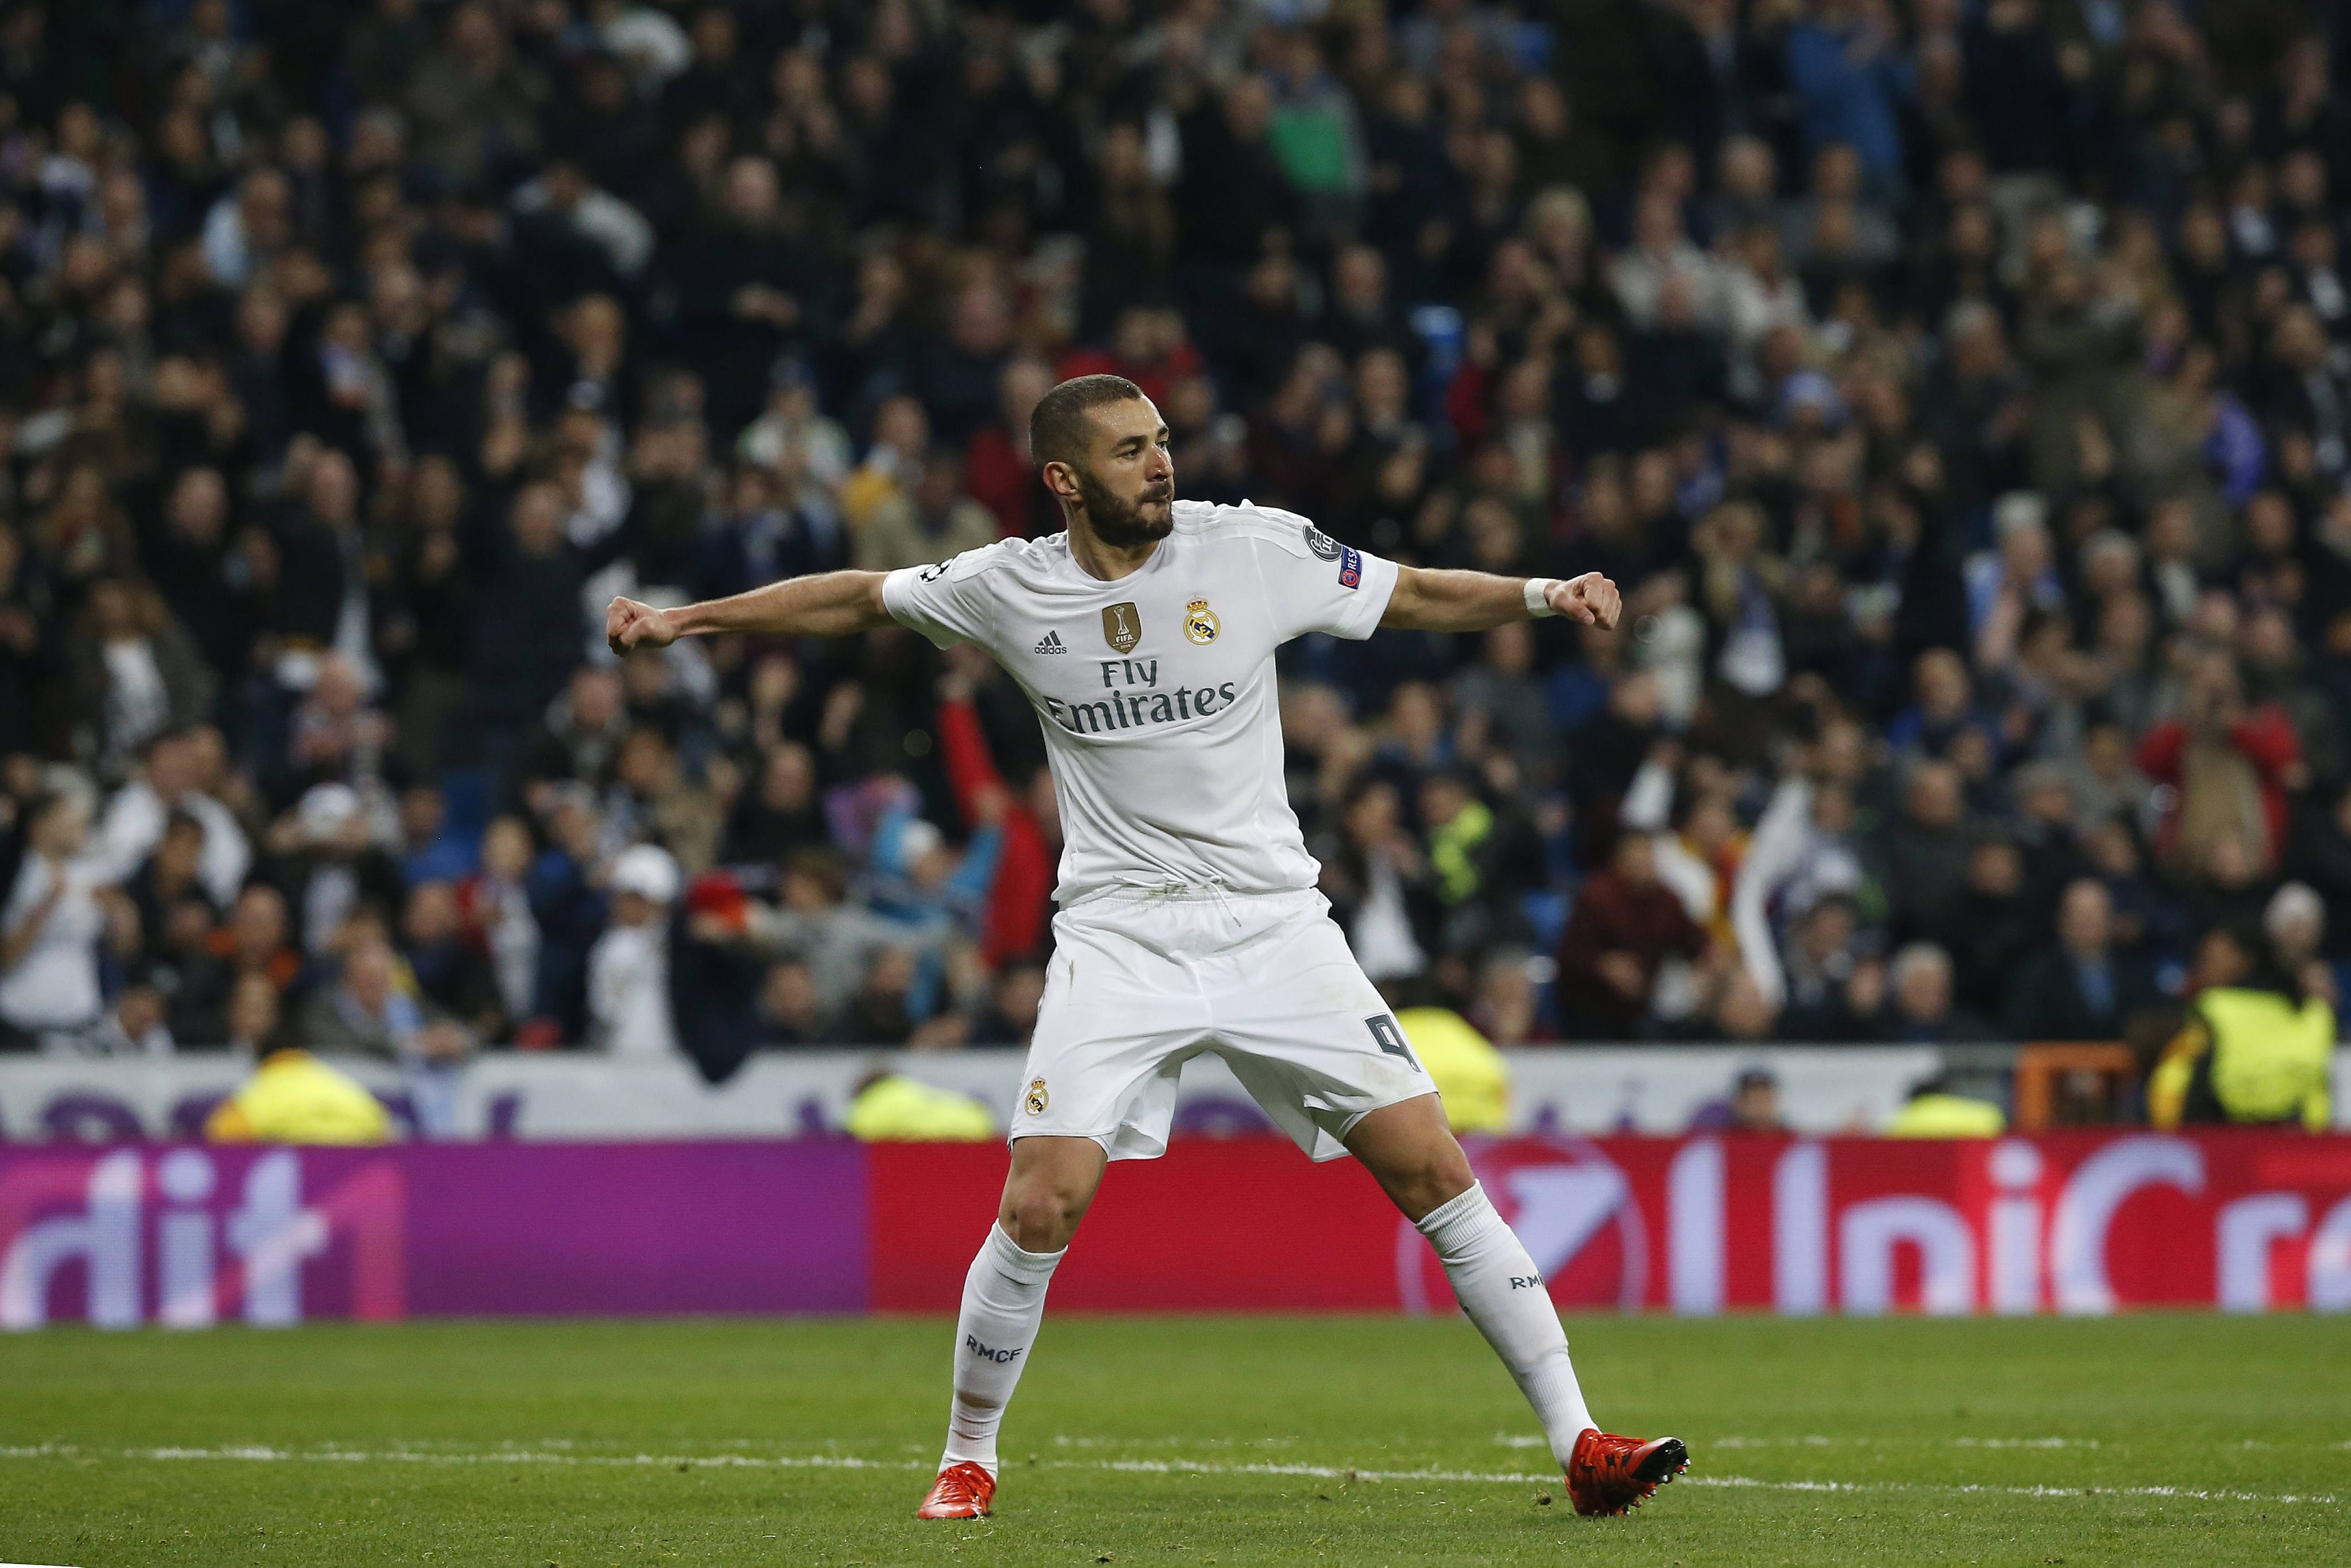 Real Madrid's French striker Karim Benzema celebrates scoring the 6-0 against Malmoe FF during their Champions League match played at Santiago Bernabeu stadium in Madrid, Spain (Photo by Kiko Huesca/EPA)